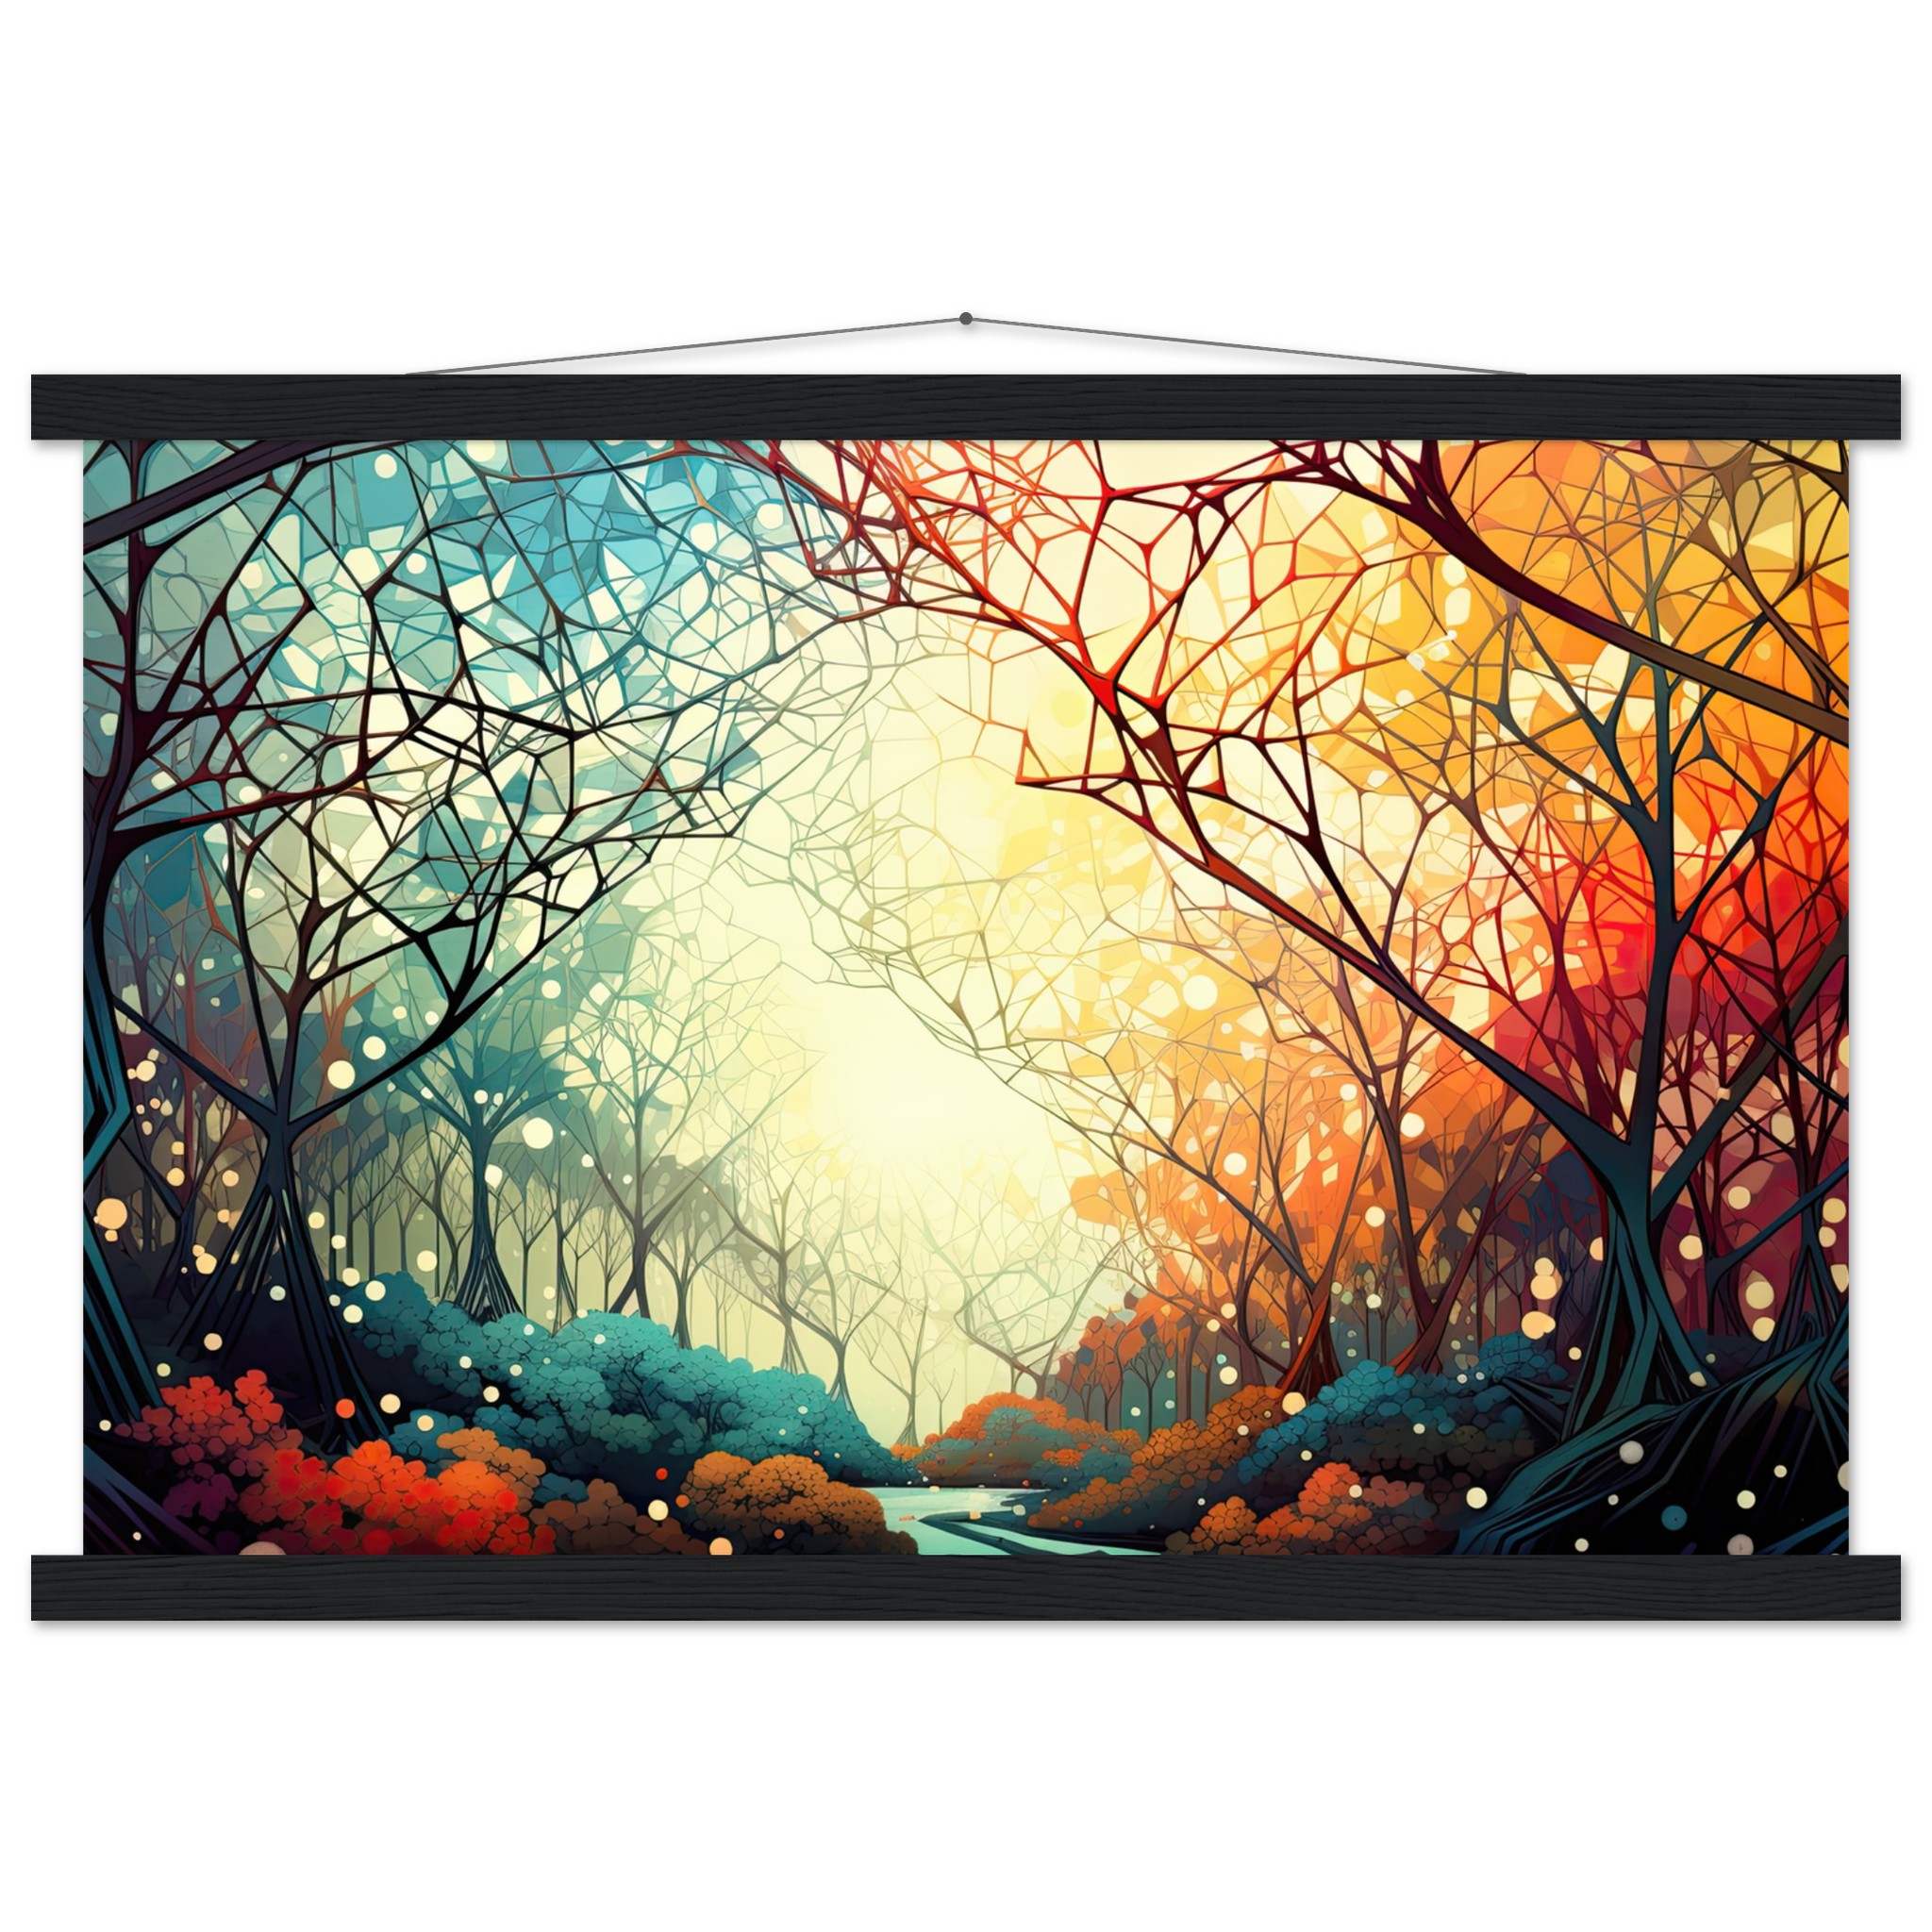 Forest Colorful Abstract Landscape Hanging Print – 40×60 cm / 16×24″, Black wall hanger